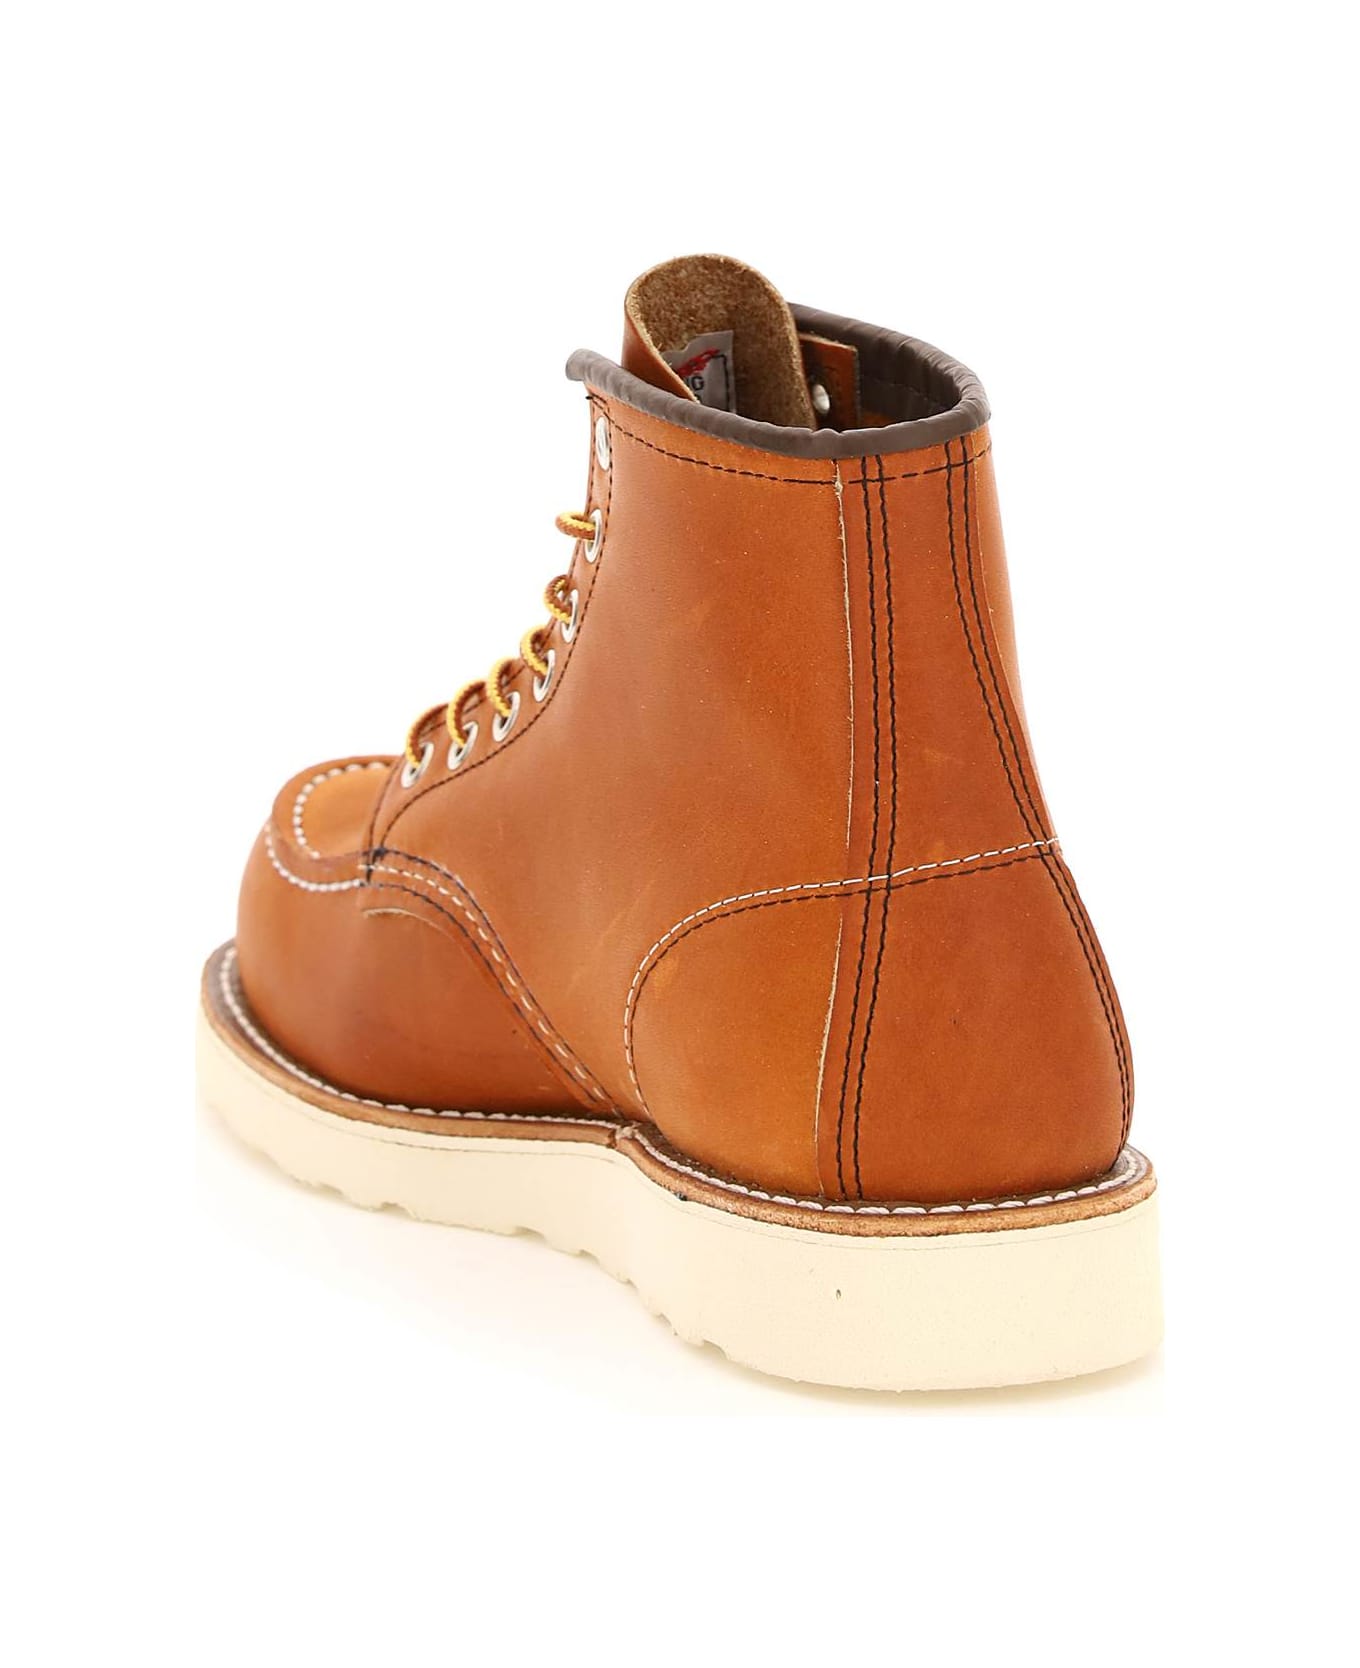 Red Wing Classic Moc Ankle Boots - ORO LEGACY (Brown)